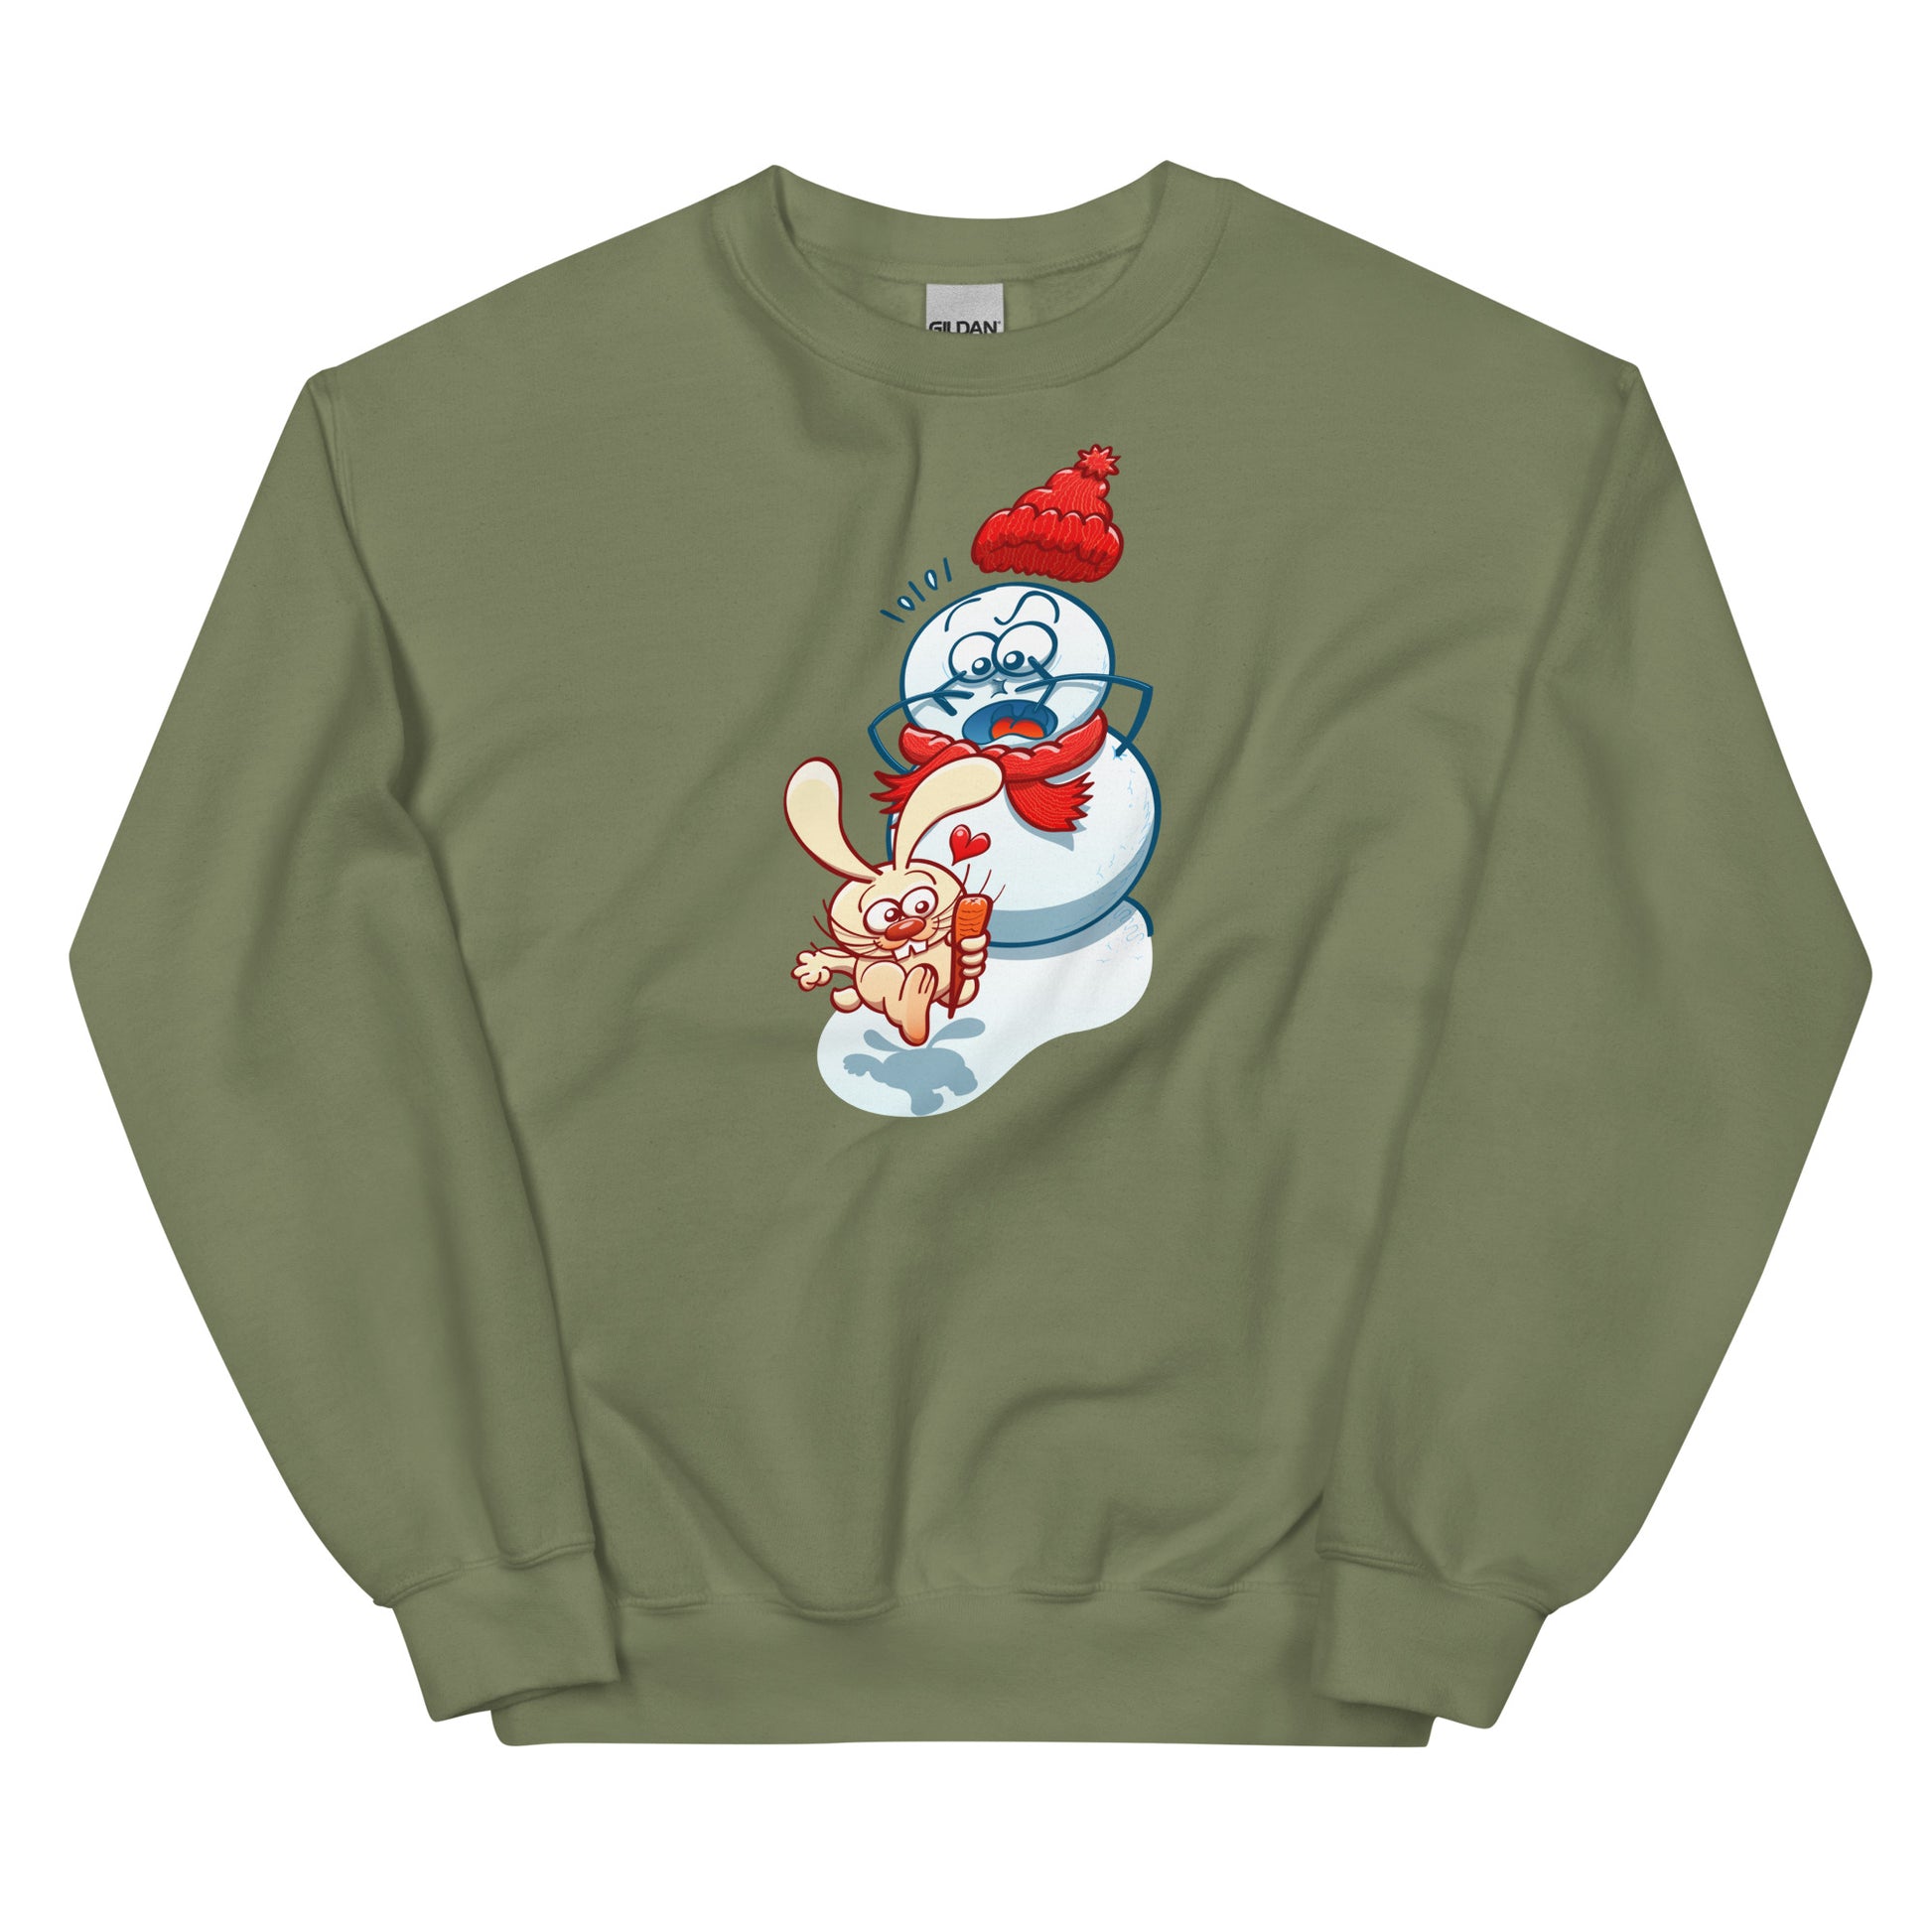 Snowman's Nose Heist: A Christmas Love Tale - Unisex Sweatshirt. Military green color. Front view